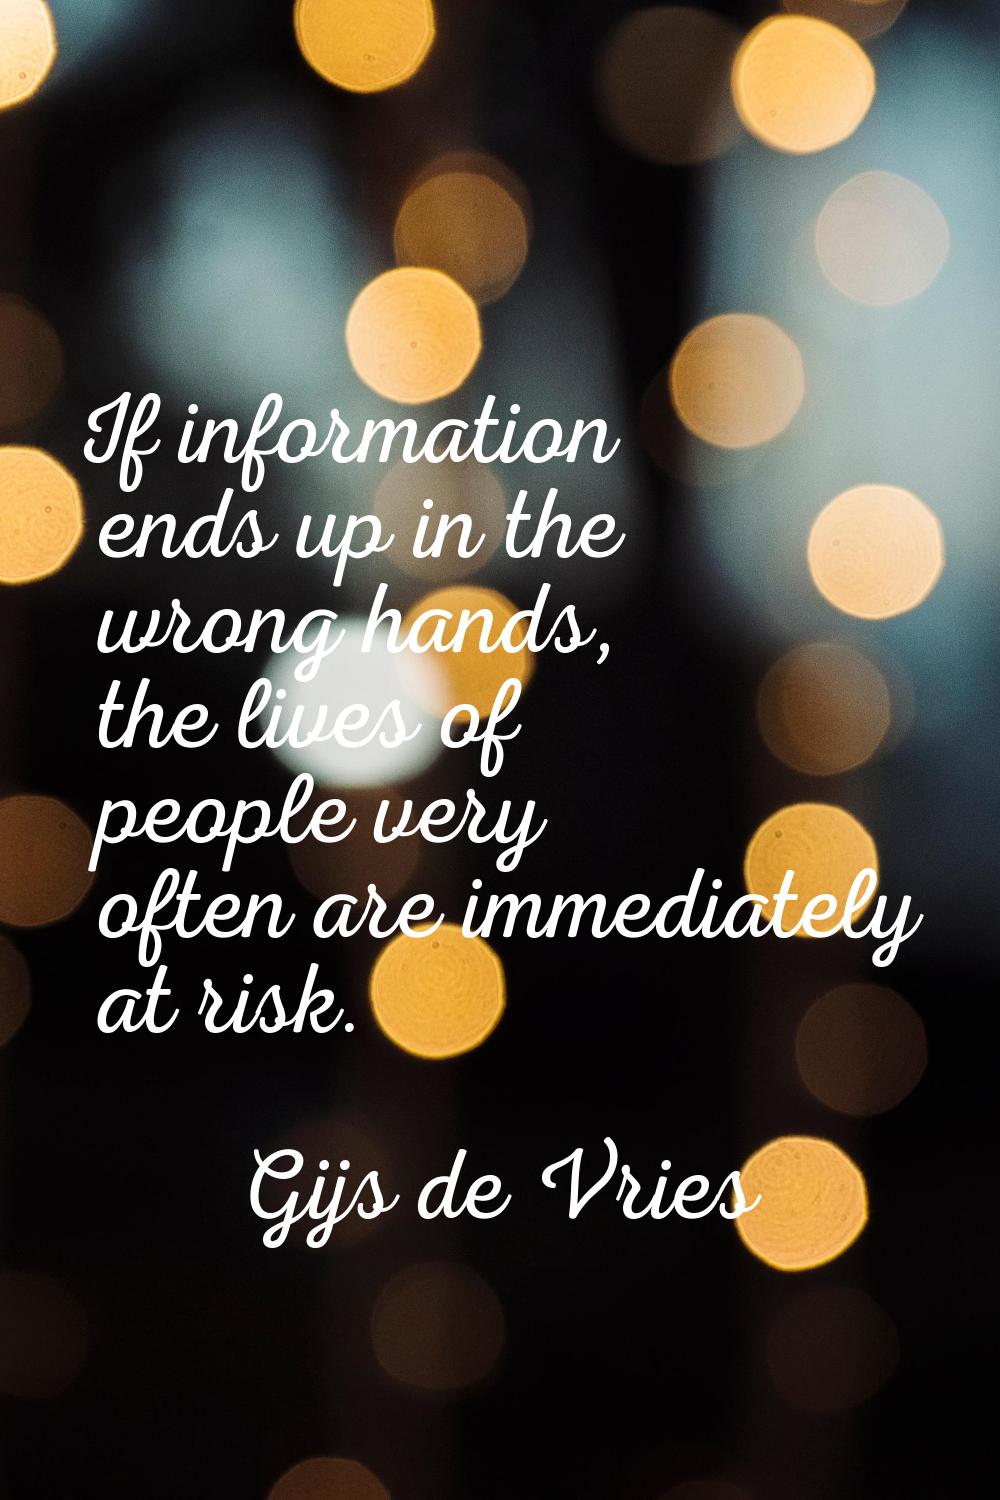 If information ends up in the wrong hands, the lives of people very often are immediately at risk.